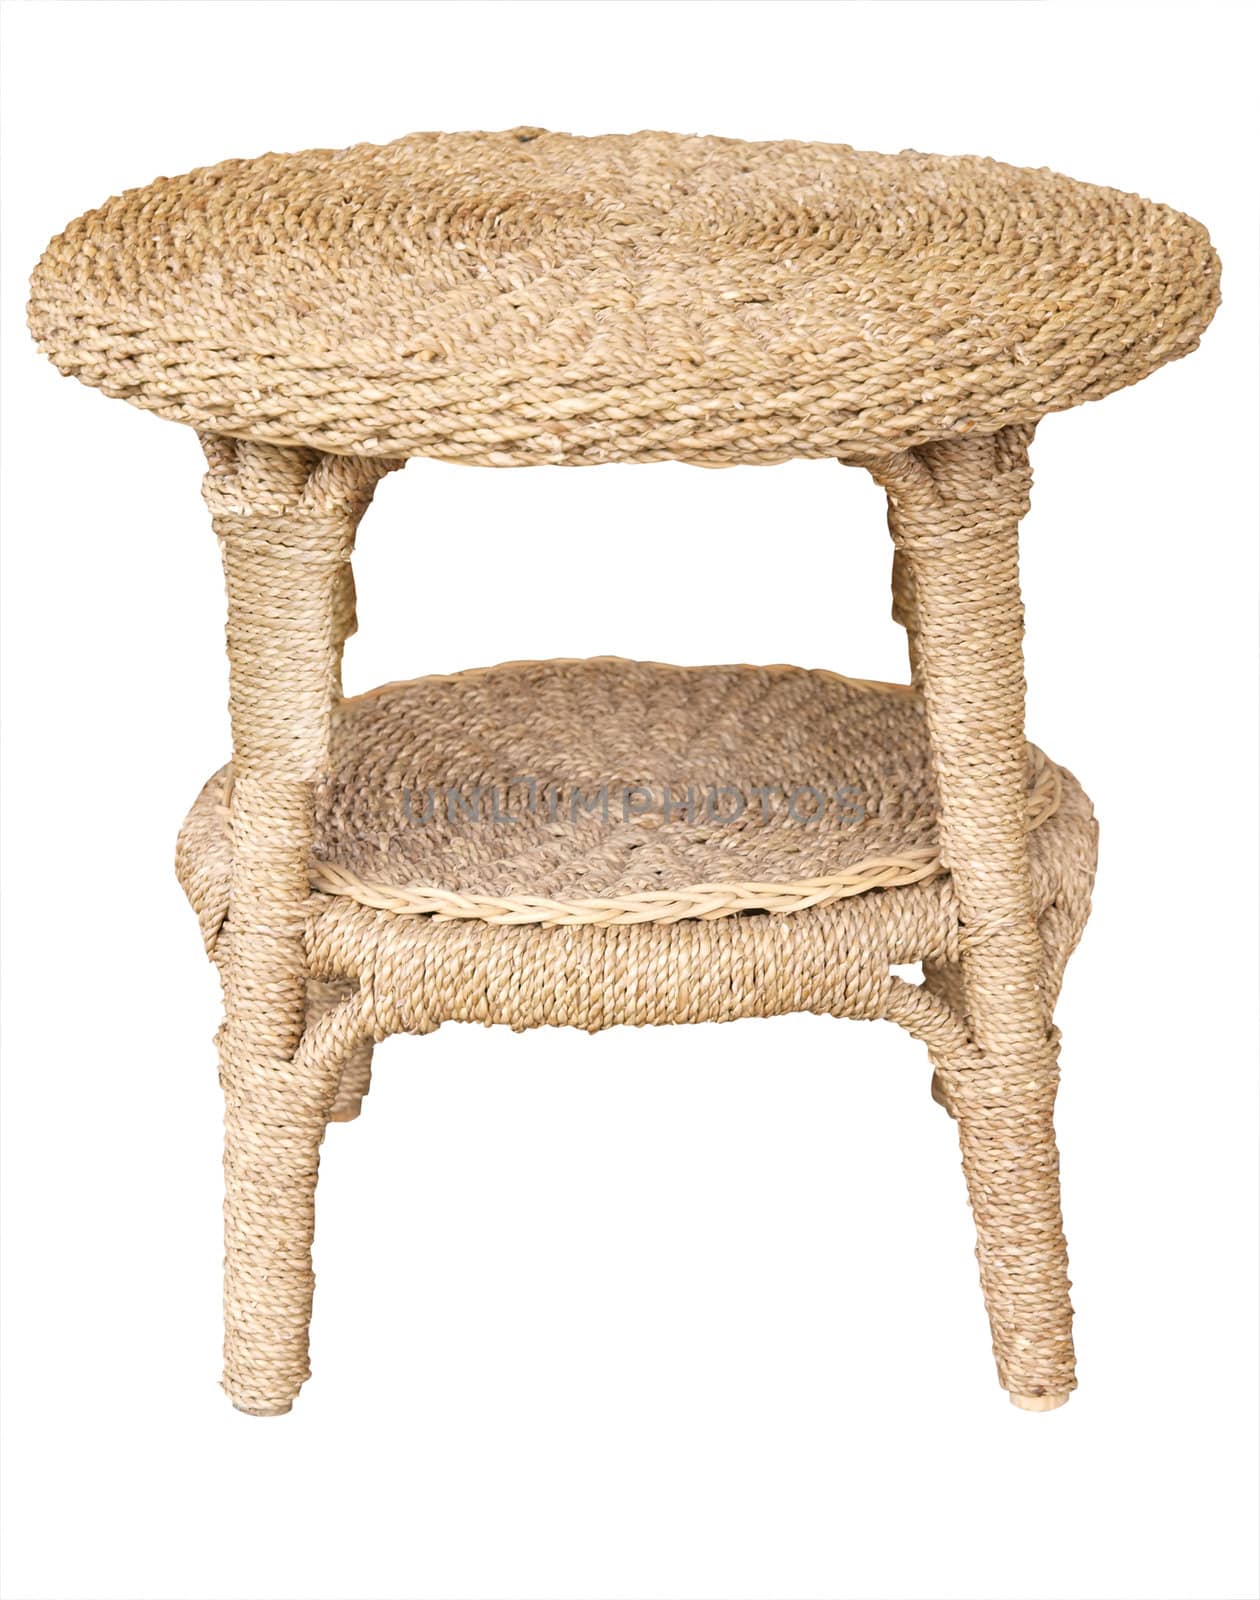 Cane Table isolated with clipping path        